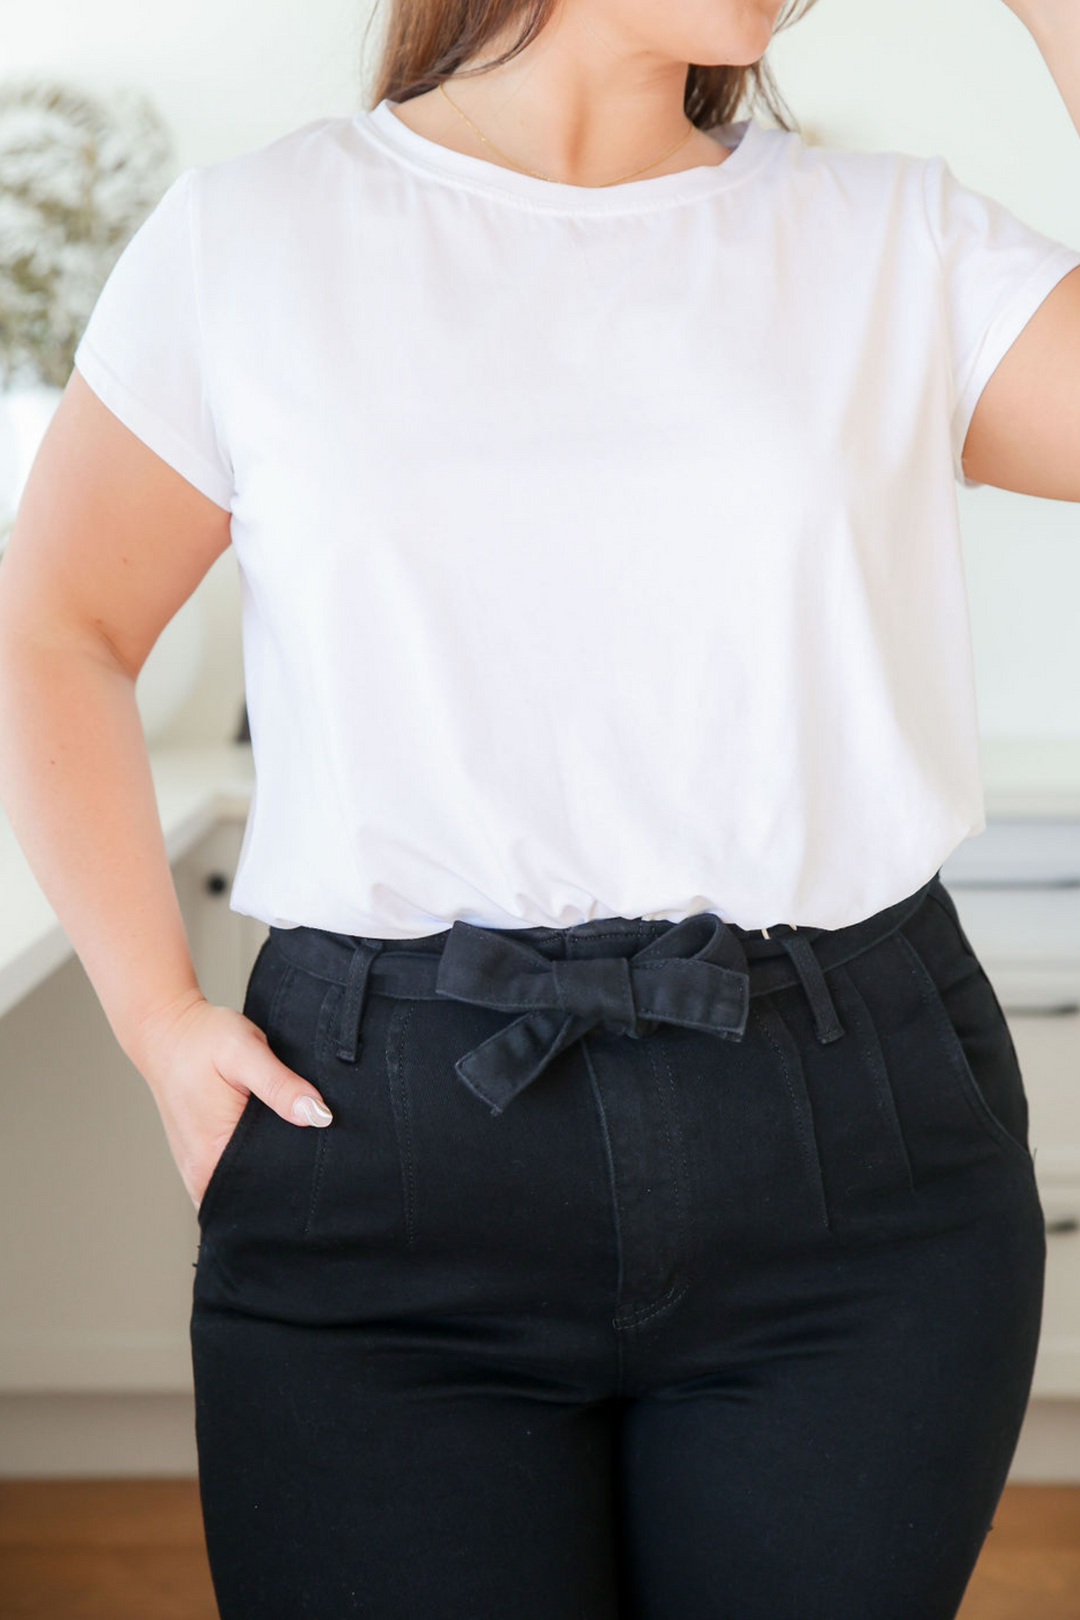 Ladies High Waisted Jeans - Black - Optional Tie Belt - Slimming Cut - Funtional Front + Back Pockets - Sizes 6 - 18 - Daisy Denim Jeans Black Close Up Front View Showing Tie Belt - Daisy's Closet